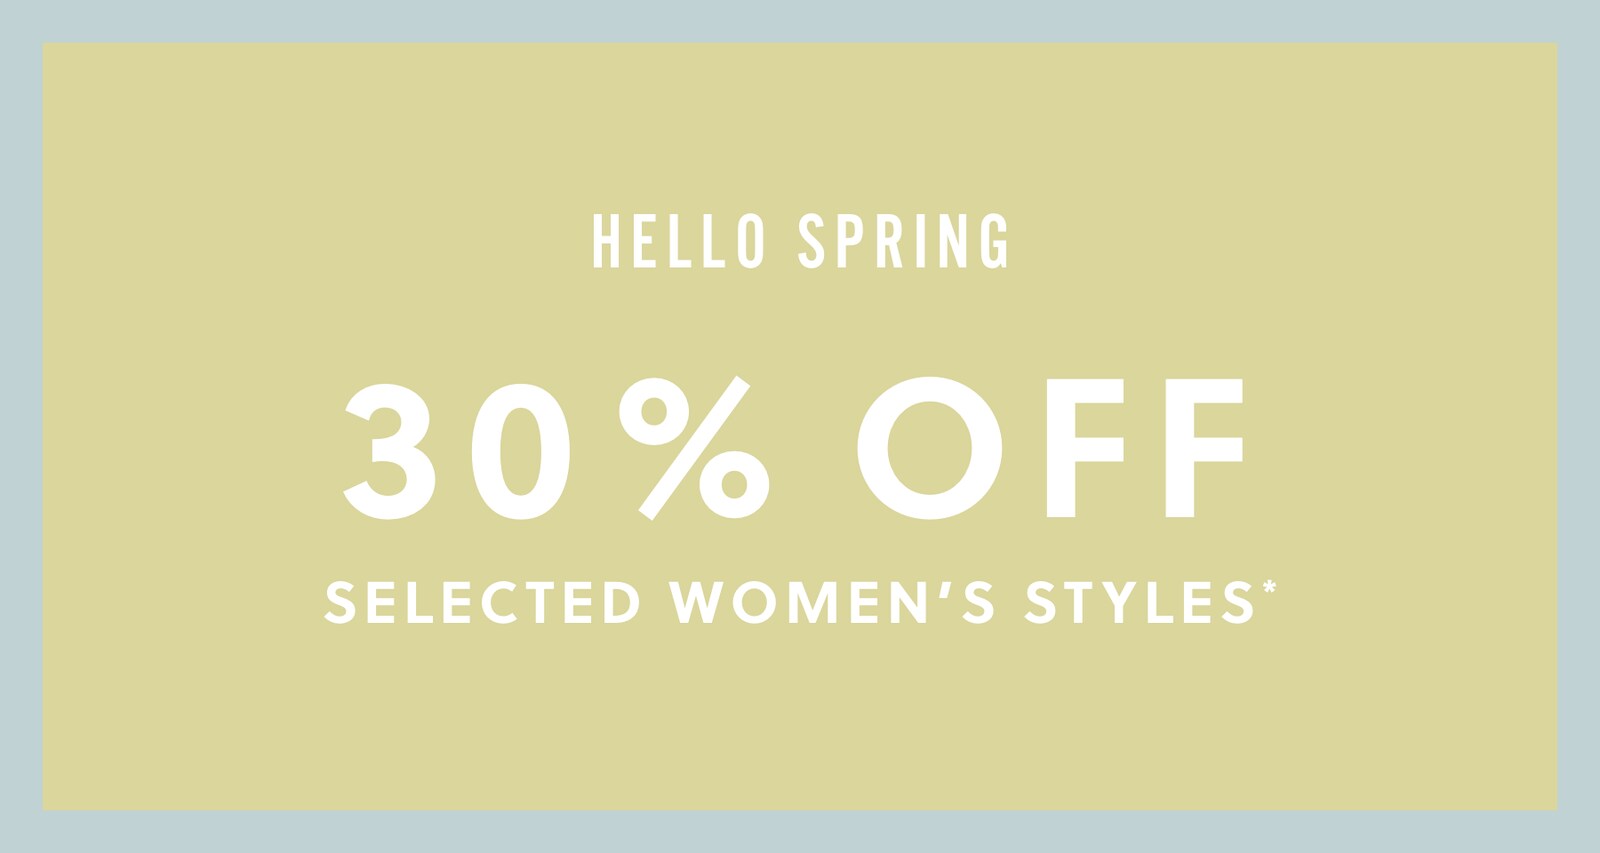 HELLO SPRING. 30% OFF SELECTED WOMEN'S STYLES*